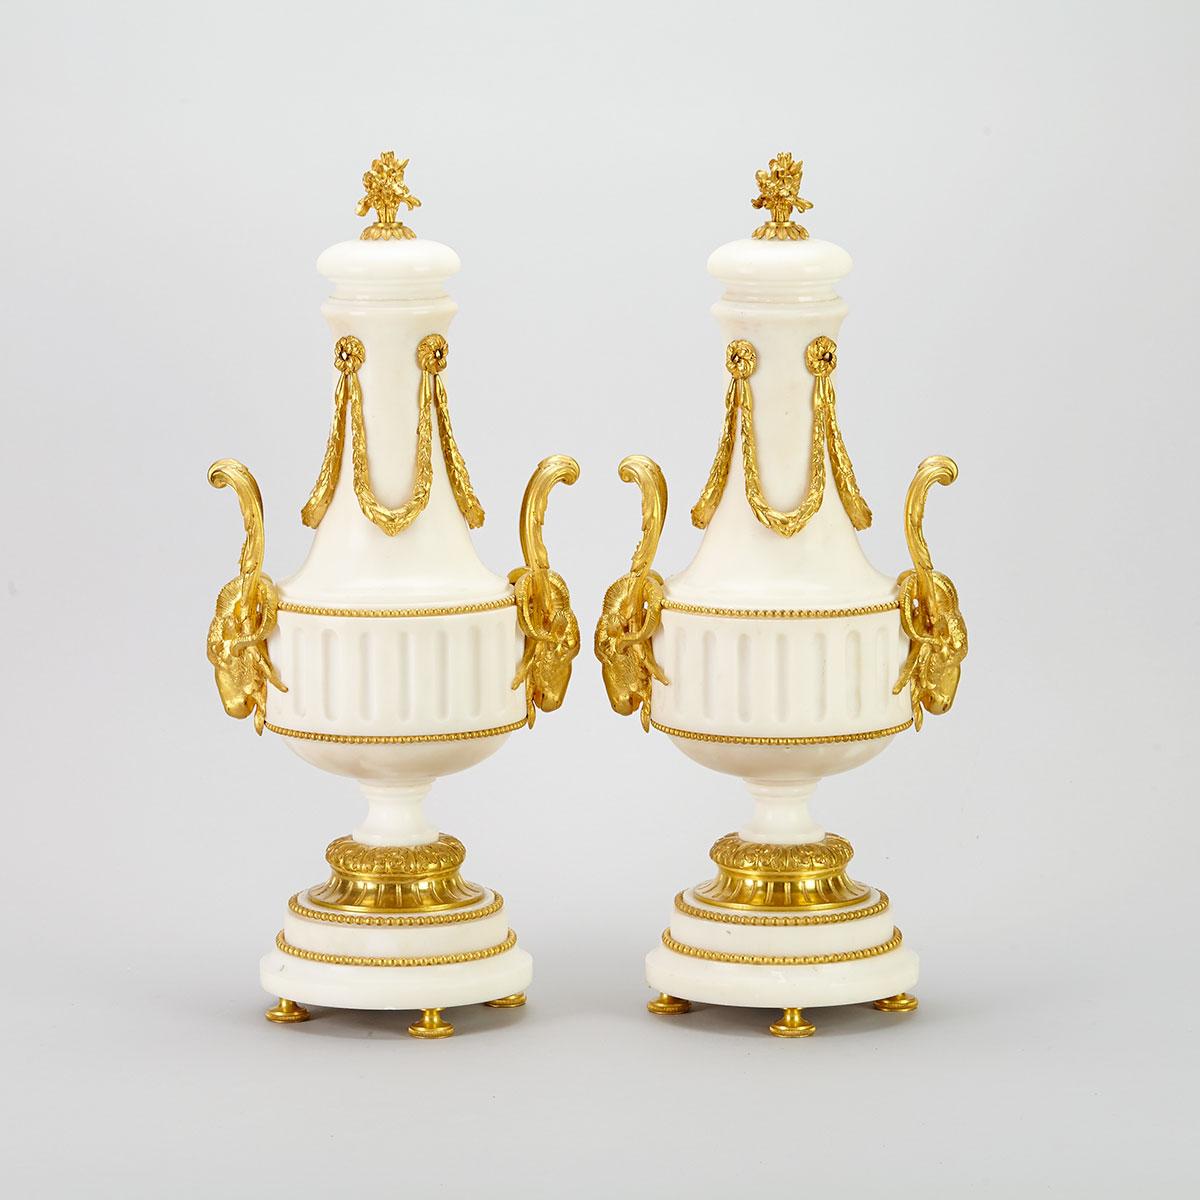 Pair of Louis XVI Style Ormolu Mounted White Marble Covered Urns, 20th century